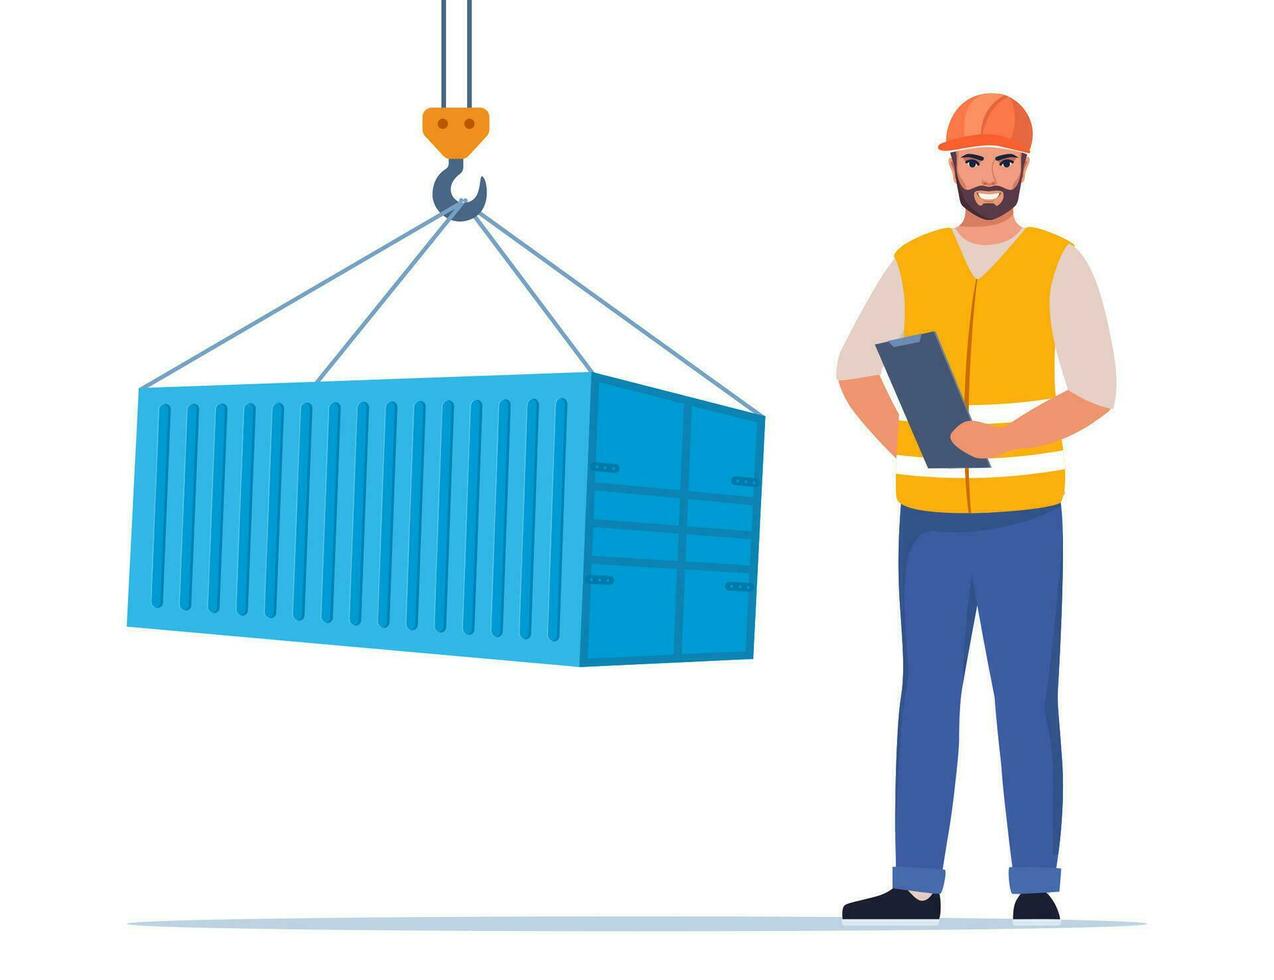 Loading freight container by crane. Man engineer. Construction Worker in uniform and orange protective helmet, holding clipboard with checklist. Head of construction works. Vector illustration.